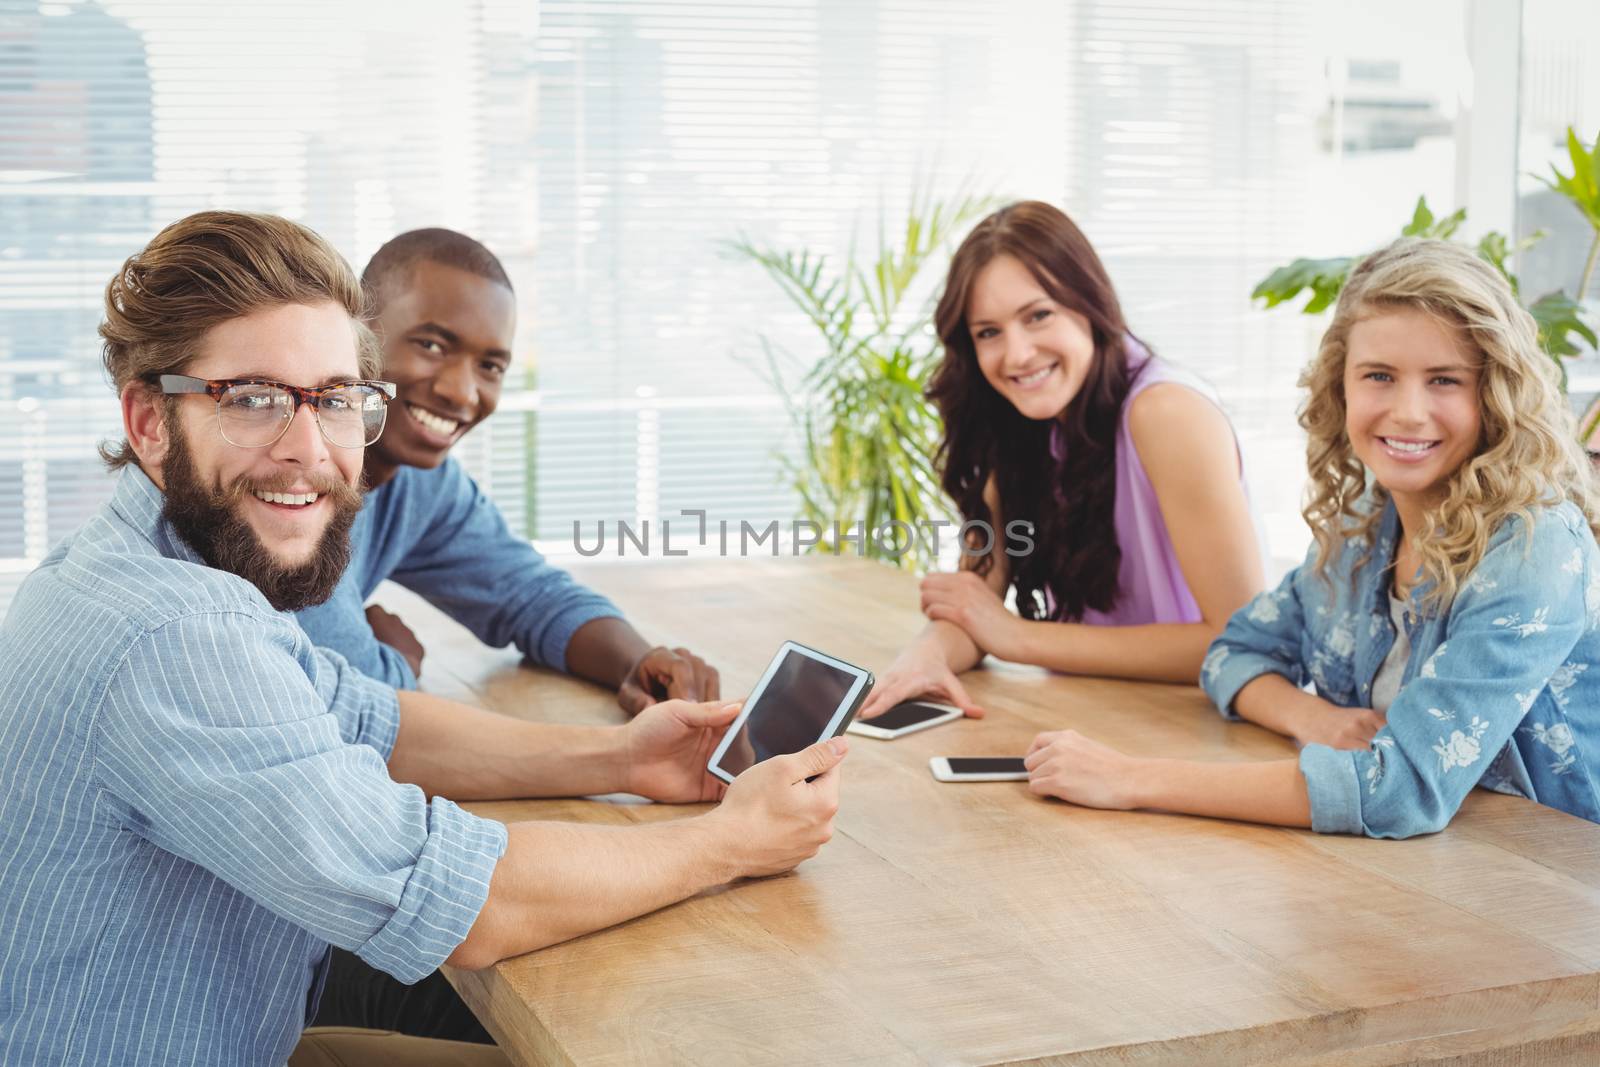 Portrait of smiling business professionals using technology at desk in office